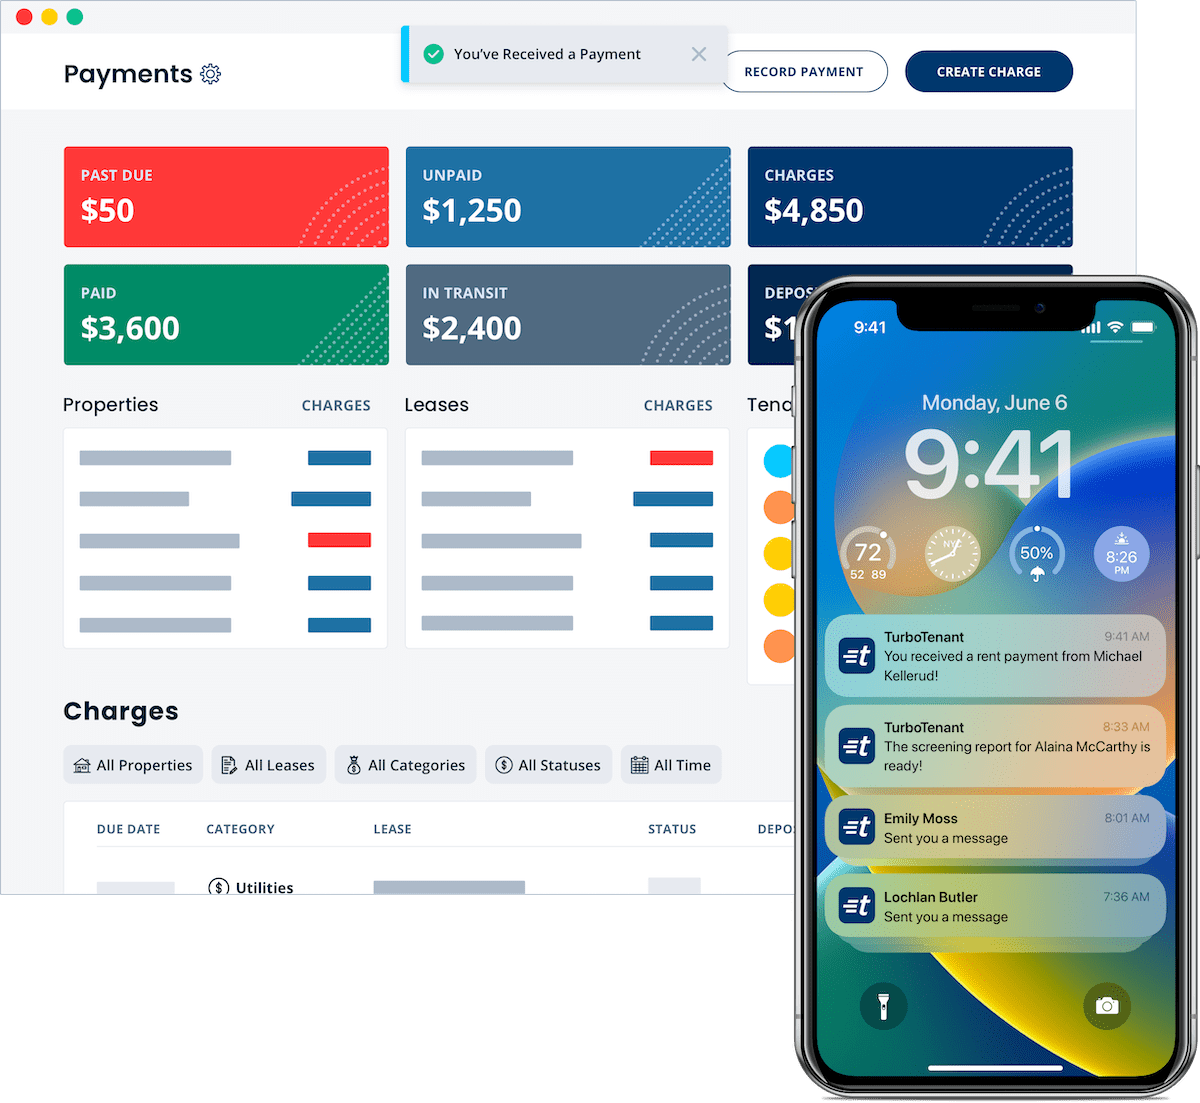 Rent Payments UI Images - mobile and desktop